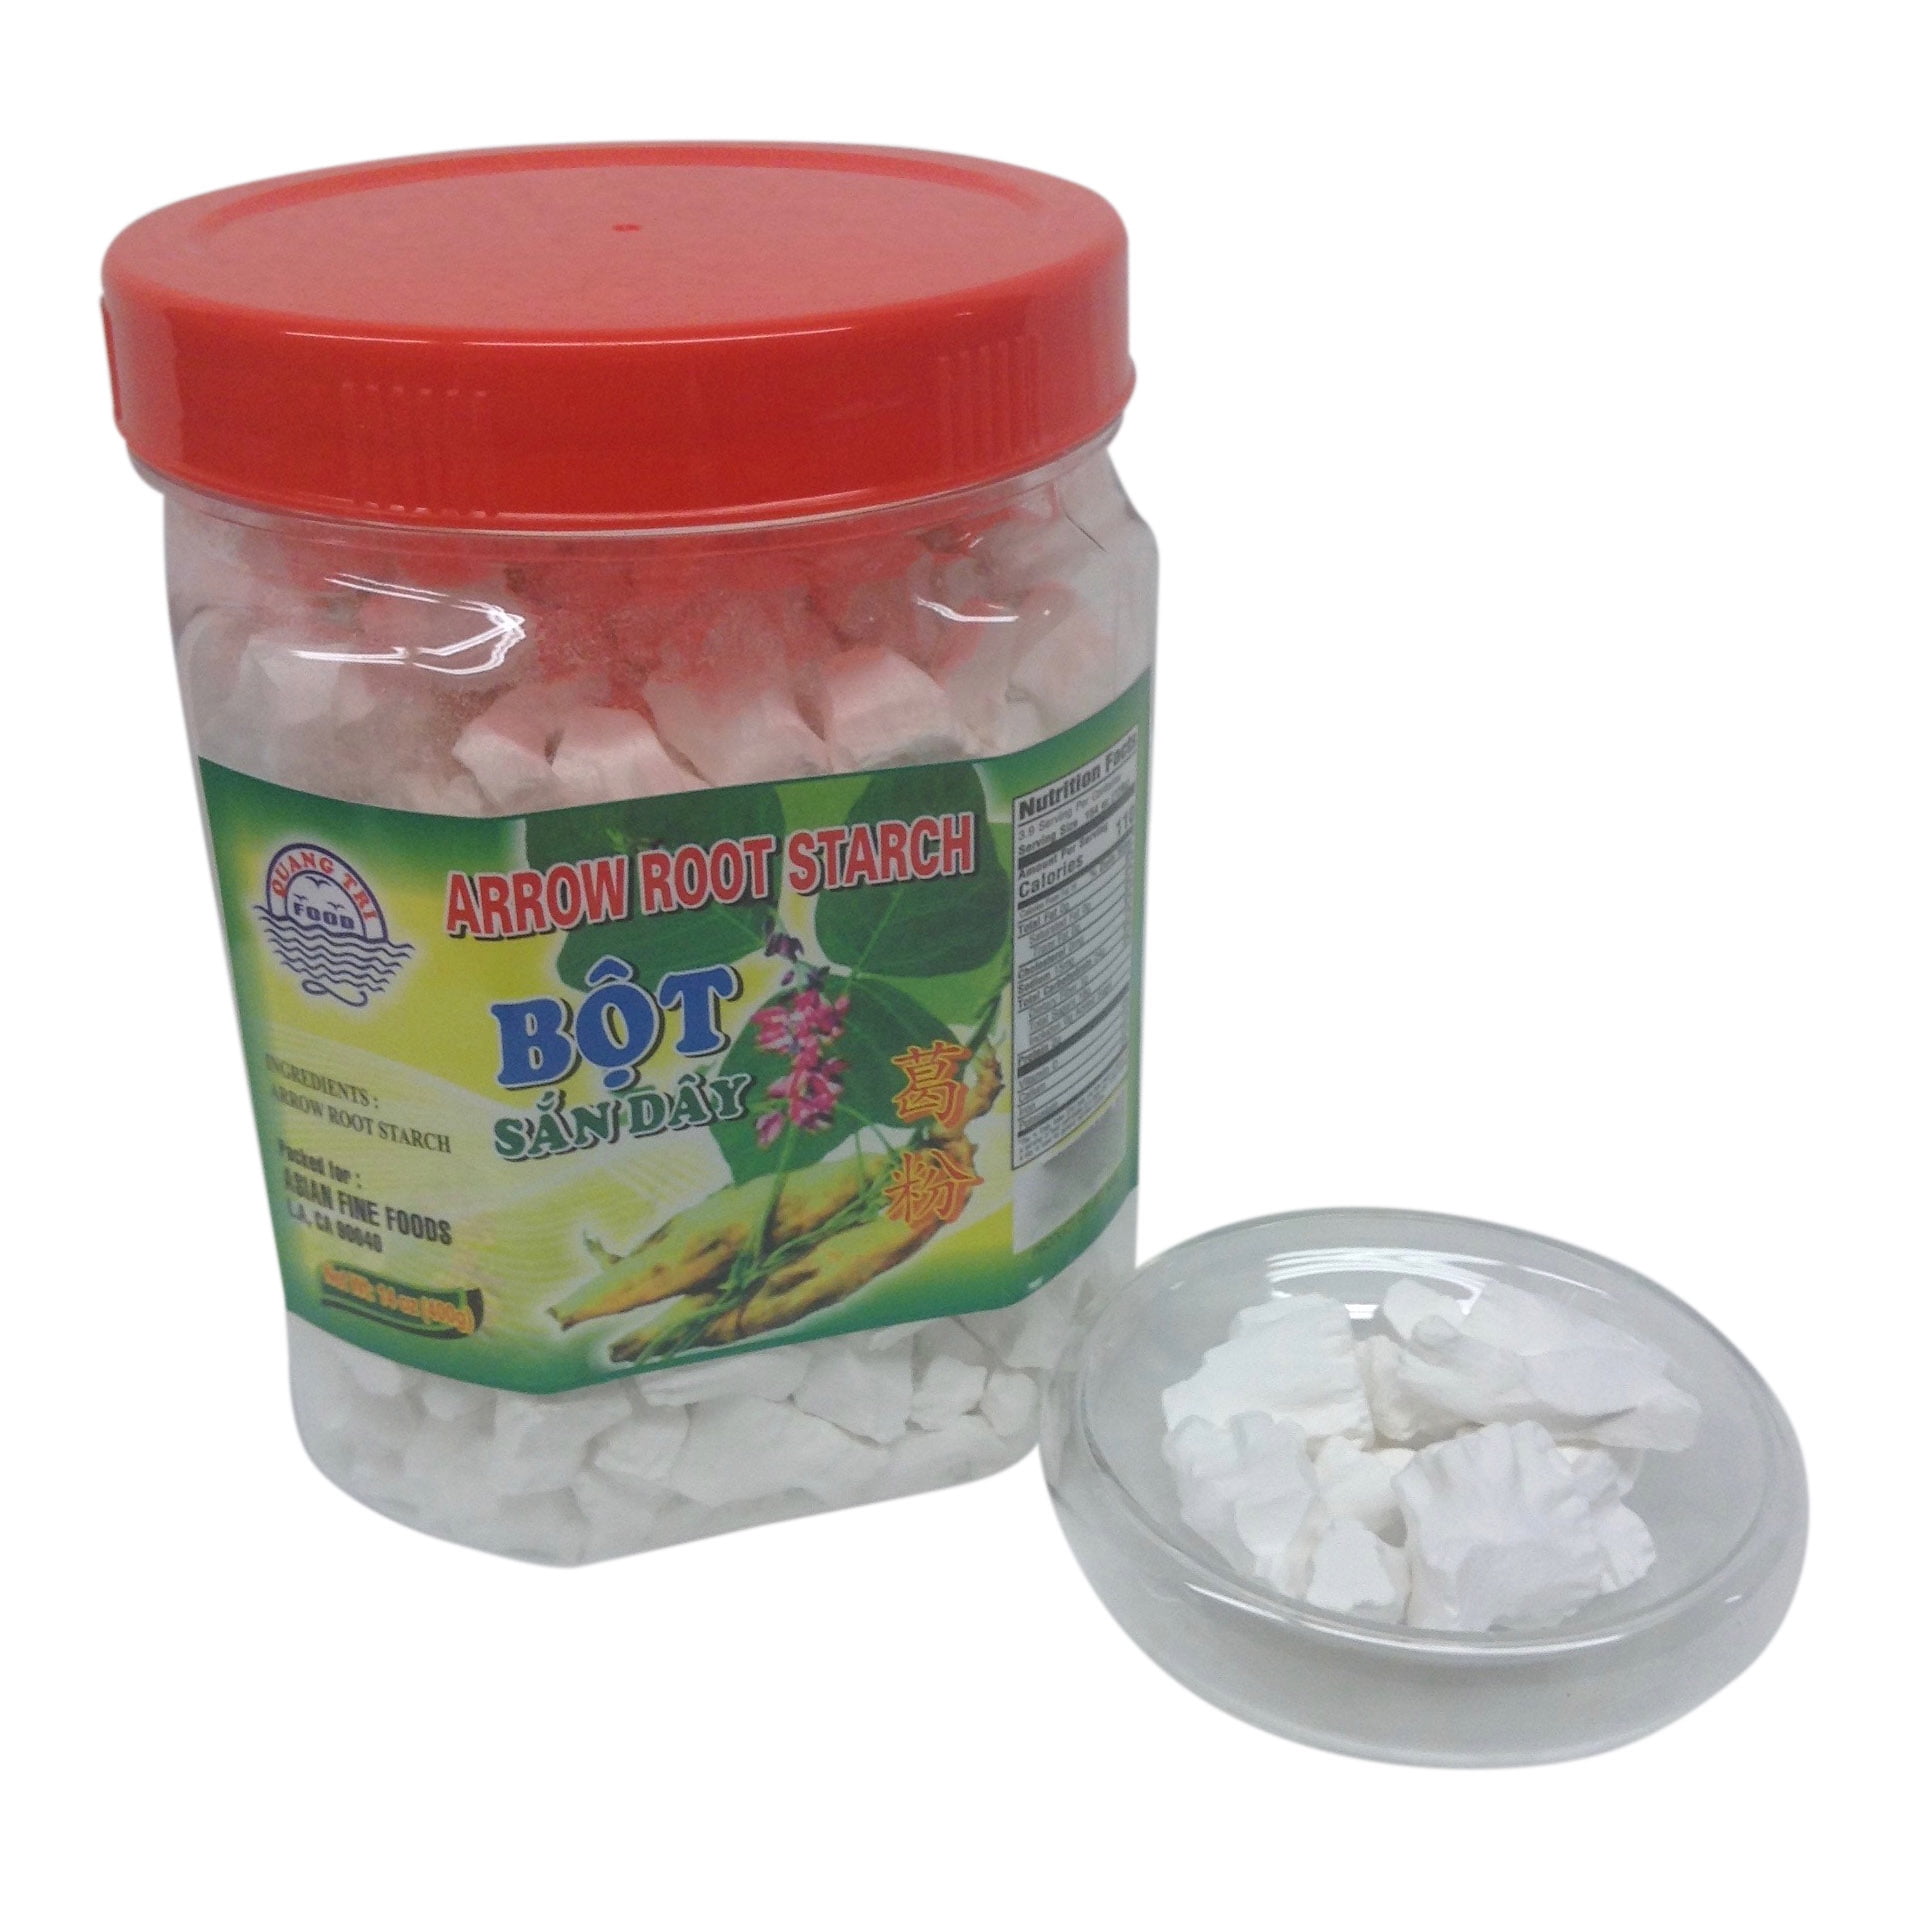 Quang Tri Arrowroot Powder Corn Starch Substitute Food Thickener